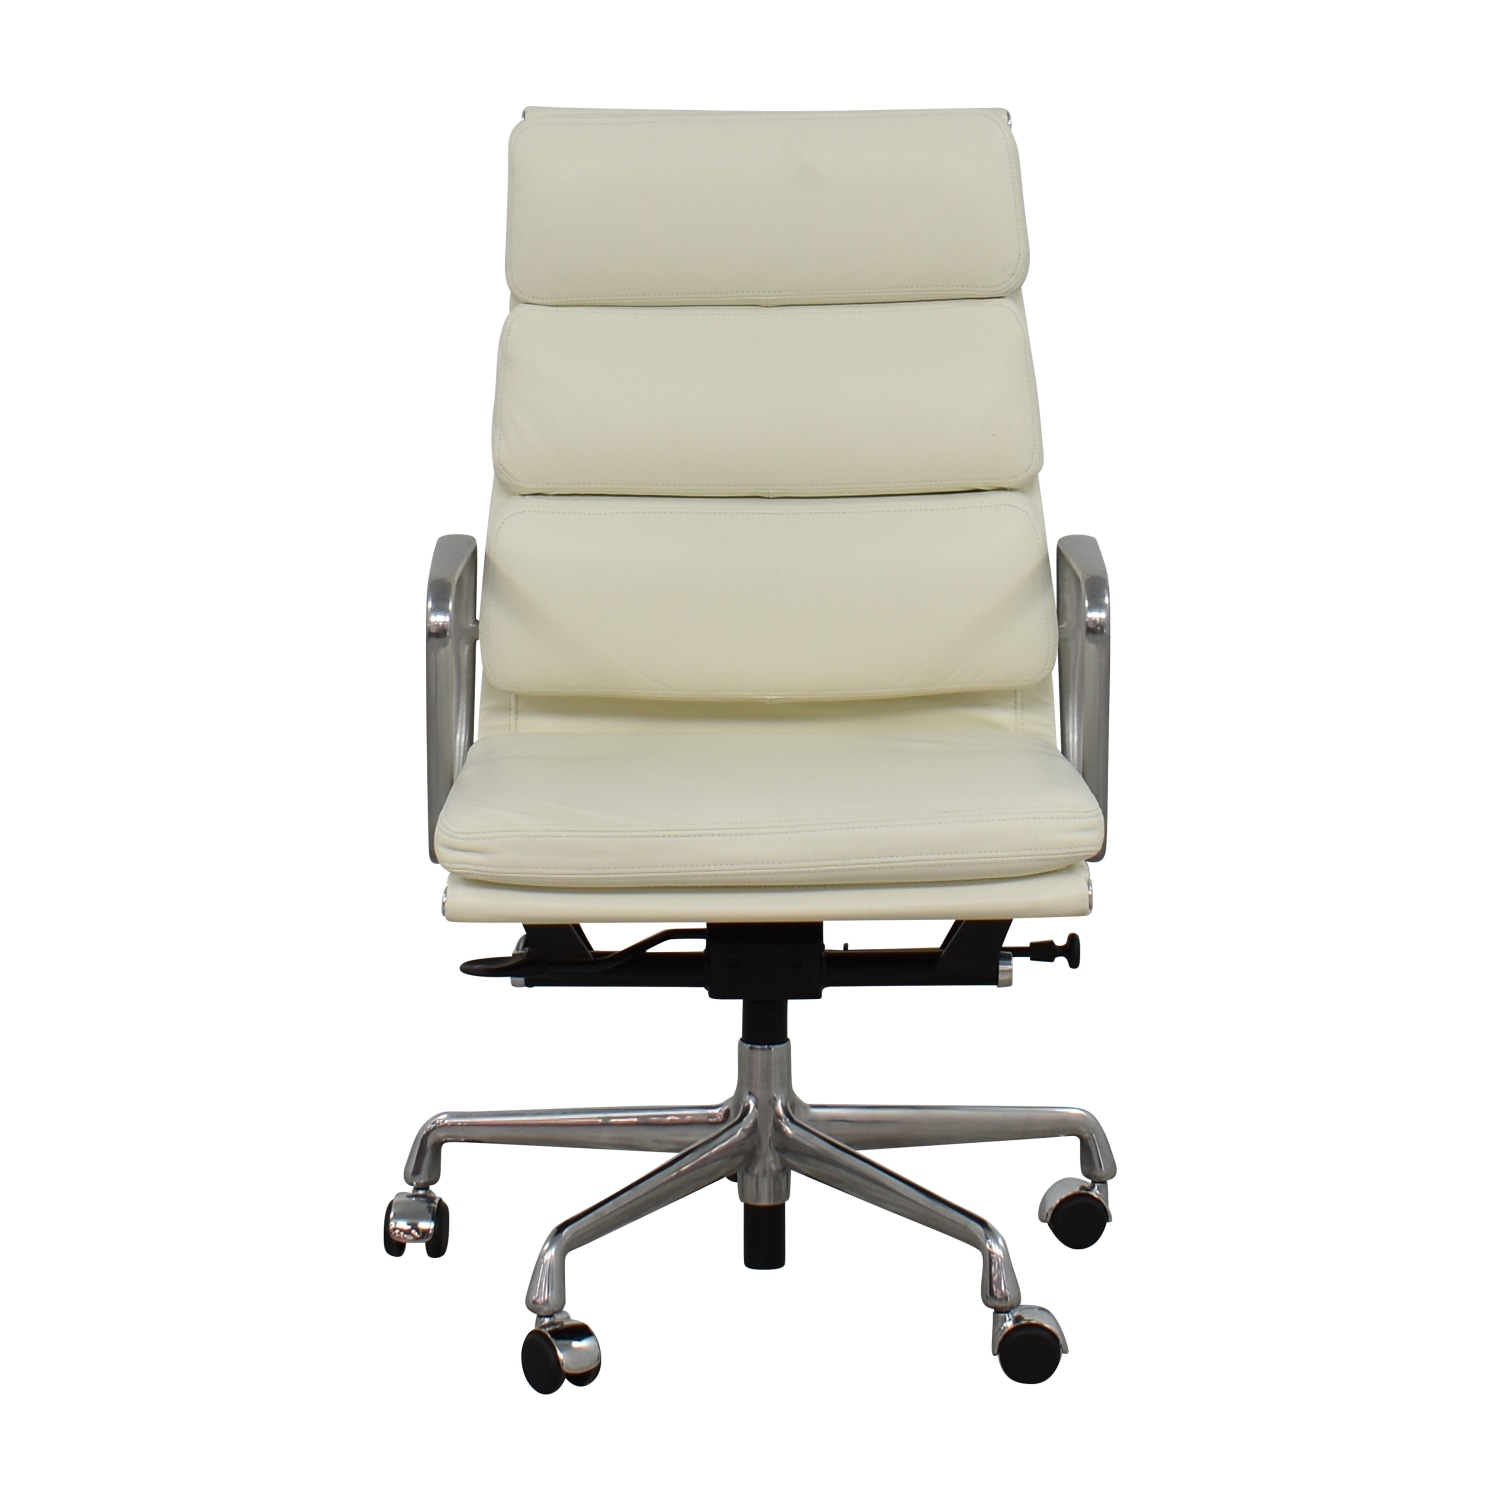 Herman Miller Herman Miller Eames Aluminum Group Executive Chair Chairs